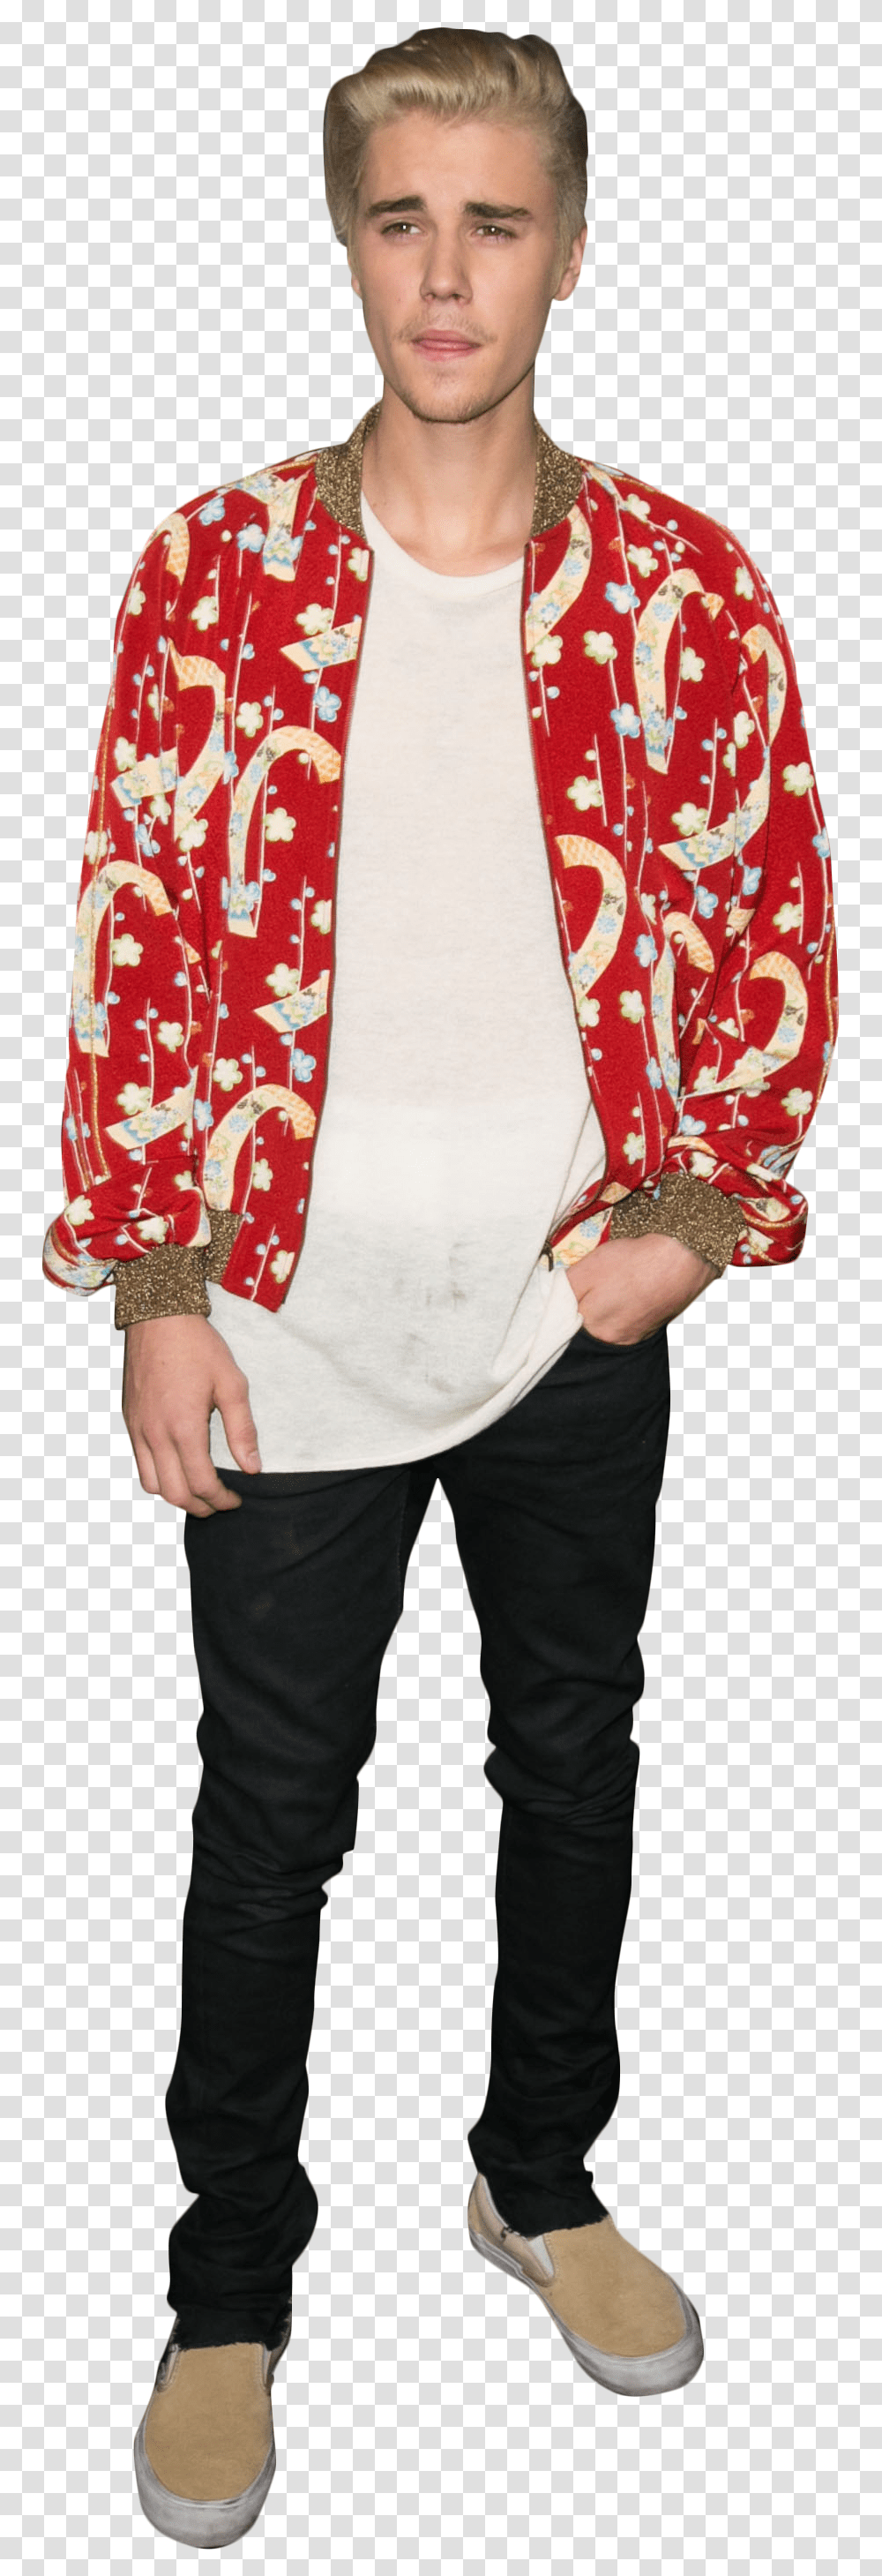 Justin Bieber Dressed In A Red Shirt Image, Sleeve, Home Decor, Person Transparent Png